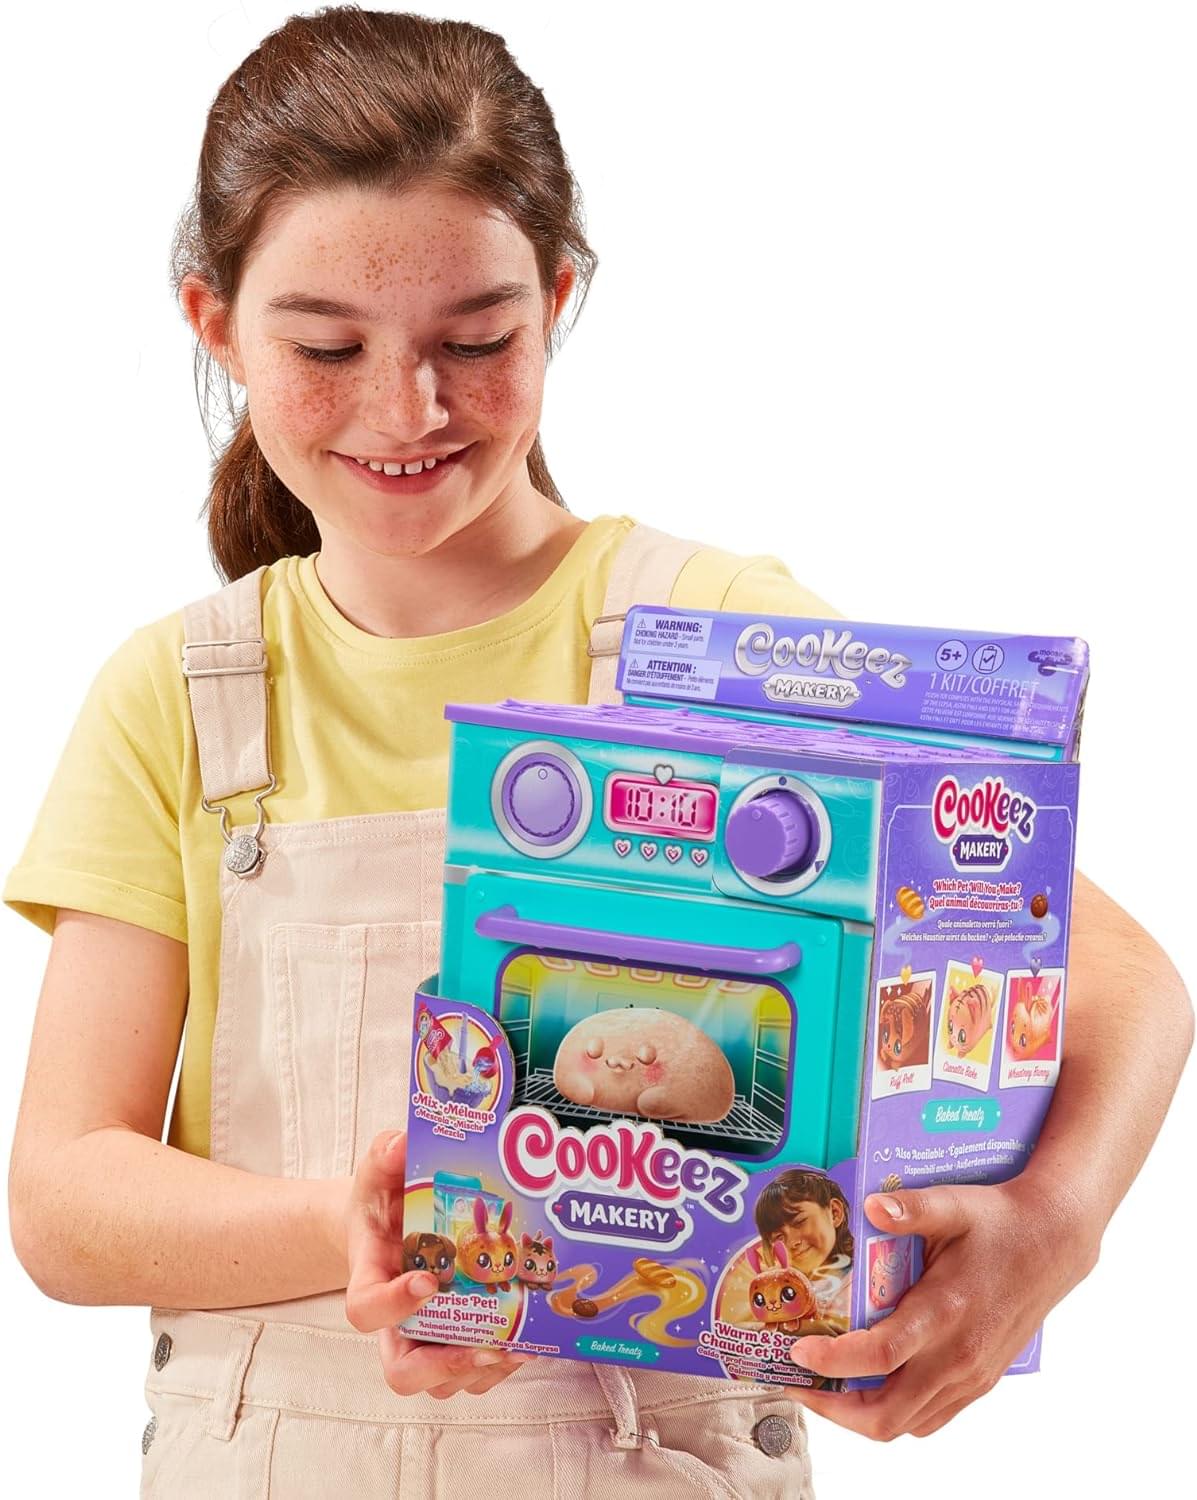 Cookeez Makery Oven Mix and Make Plush Playset | Bread